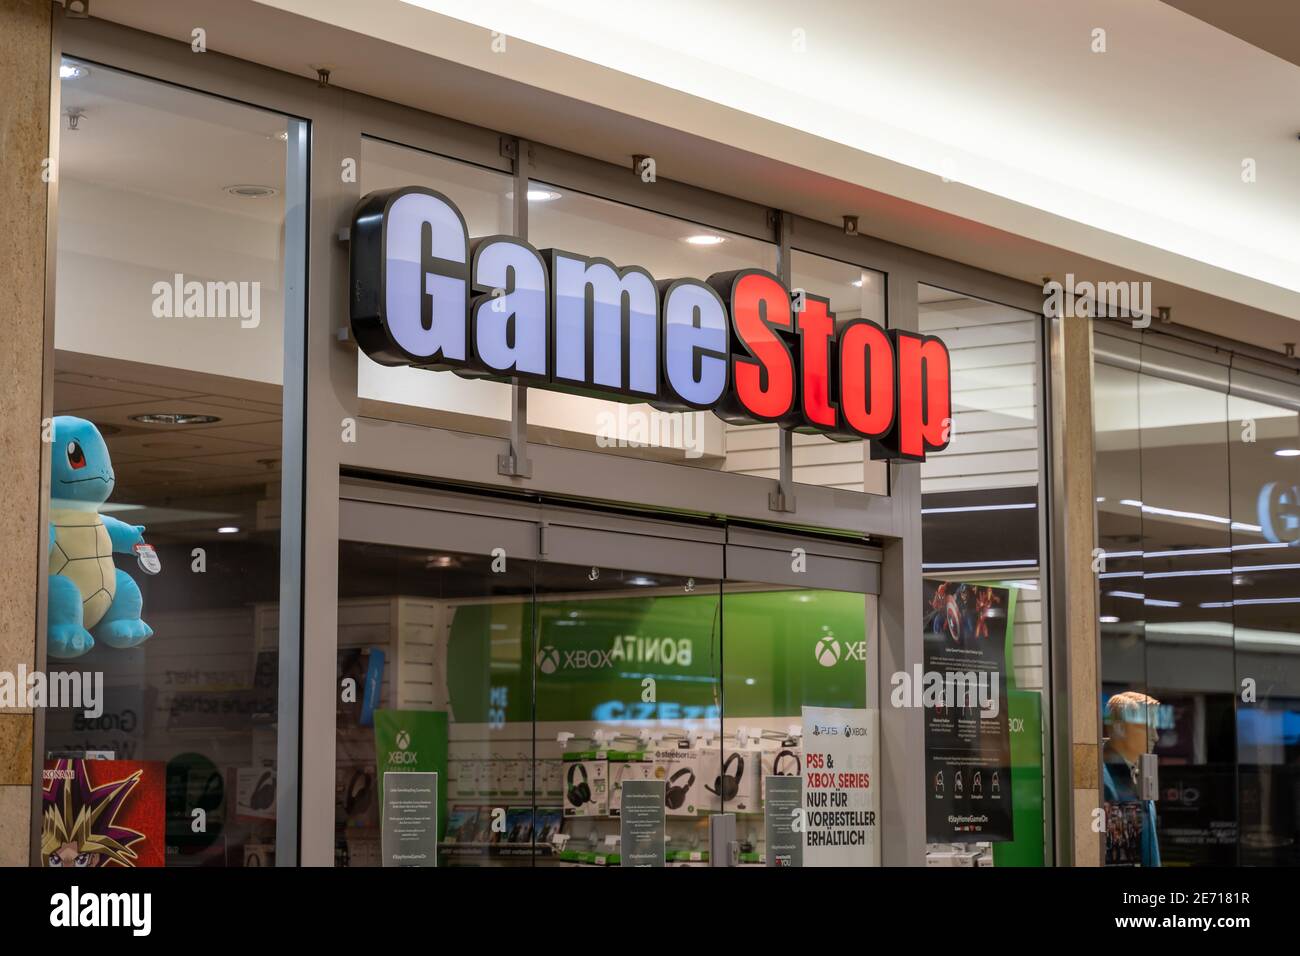 GameStop store front in a shopping center. Big illuminated logo shining during Covid-19 lockdown while the retail shop remains closed. Stock Photo